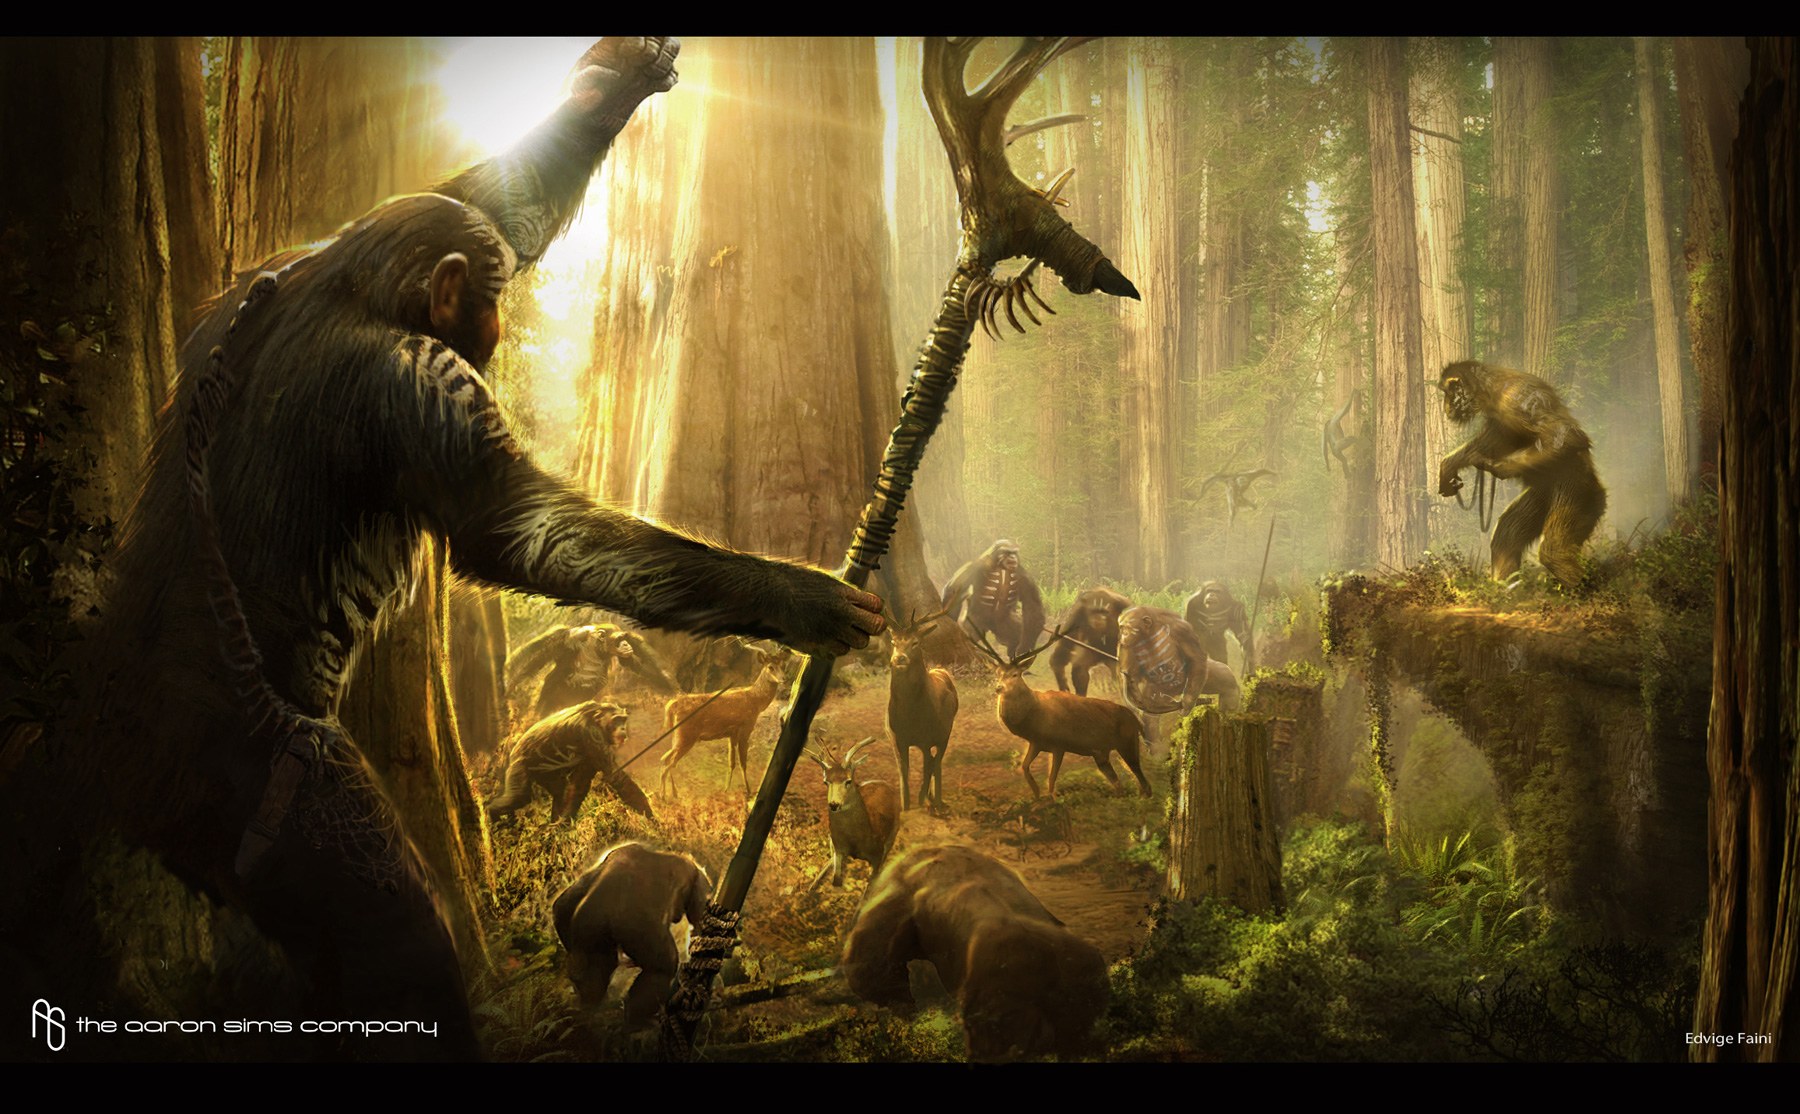 striking-concept-art-from-dawn-of-the-planet-of-the-apes4.jpg